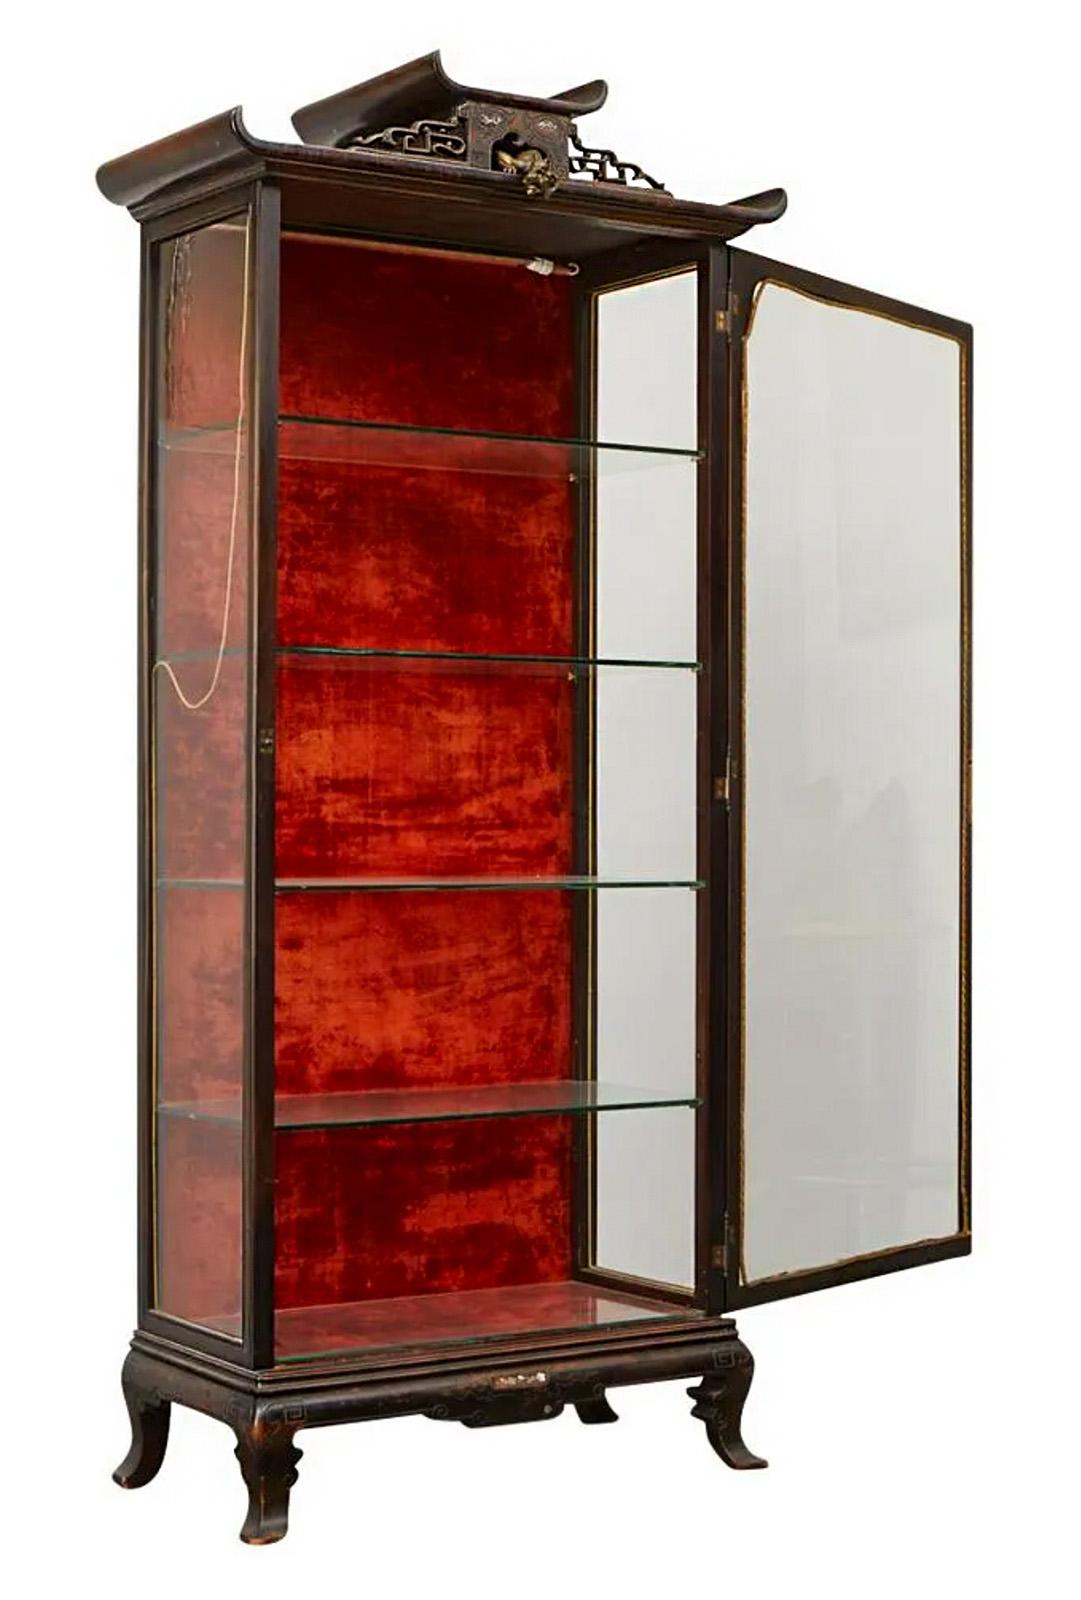 A tall vitrine cabinet with a glass door that opens to five glass shelves and velvet backing, featuring a bronze dragon at the top. In the style of Gabriel Viardot (1830-1906) who was a famous Parisian cabinetmaker specializing in the production of